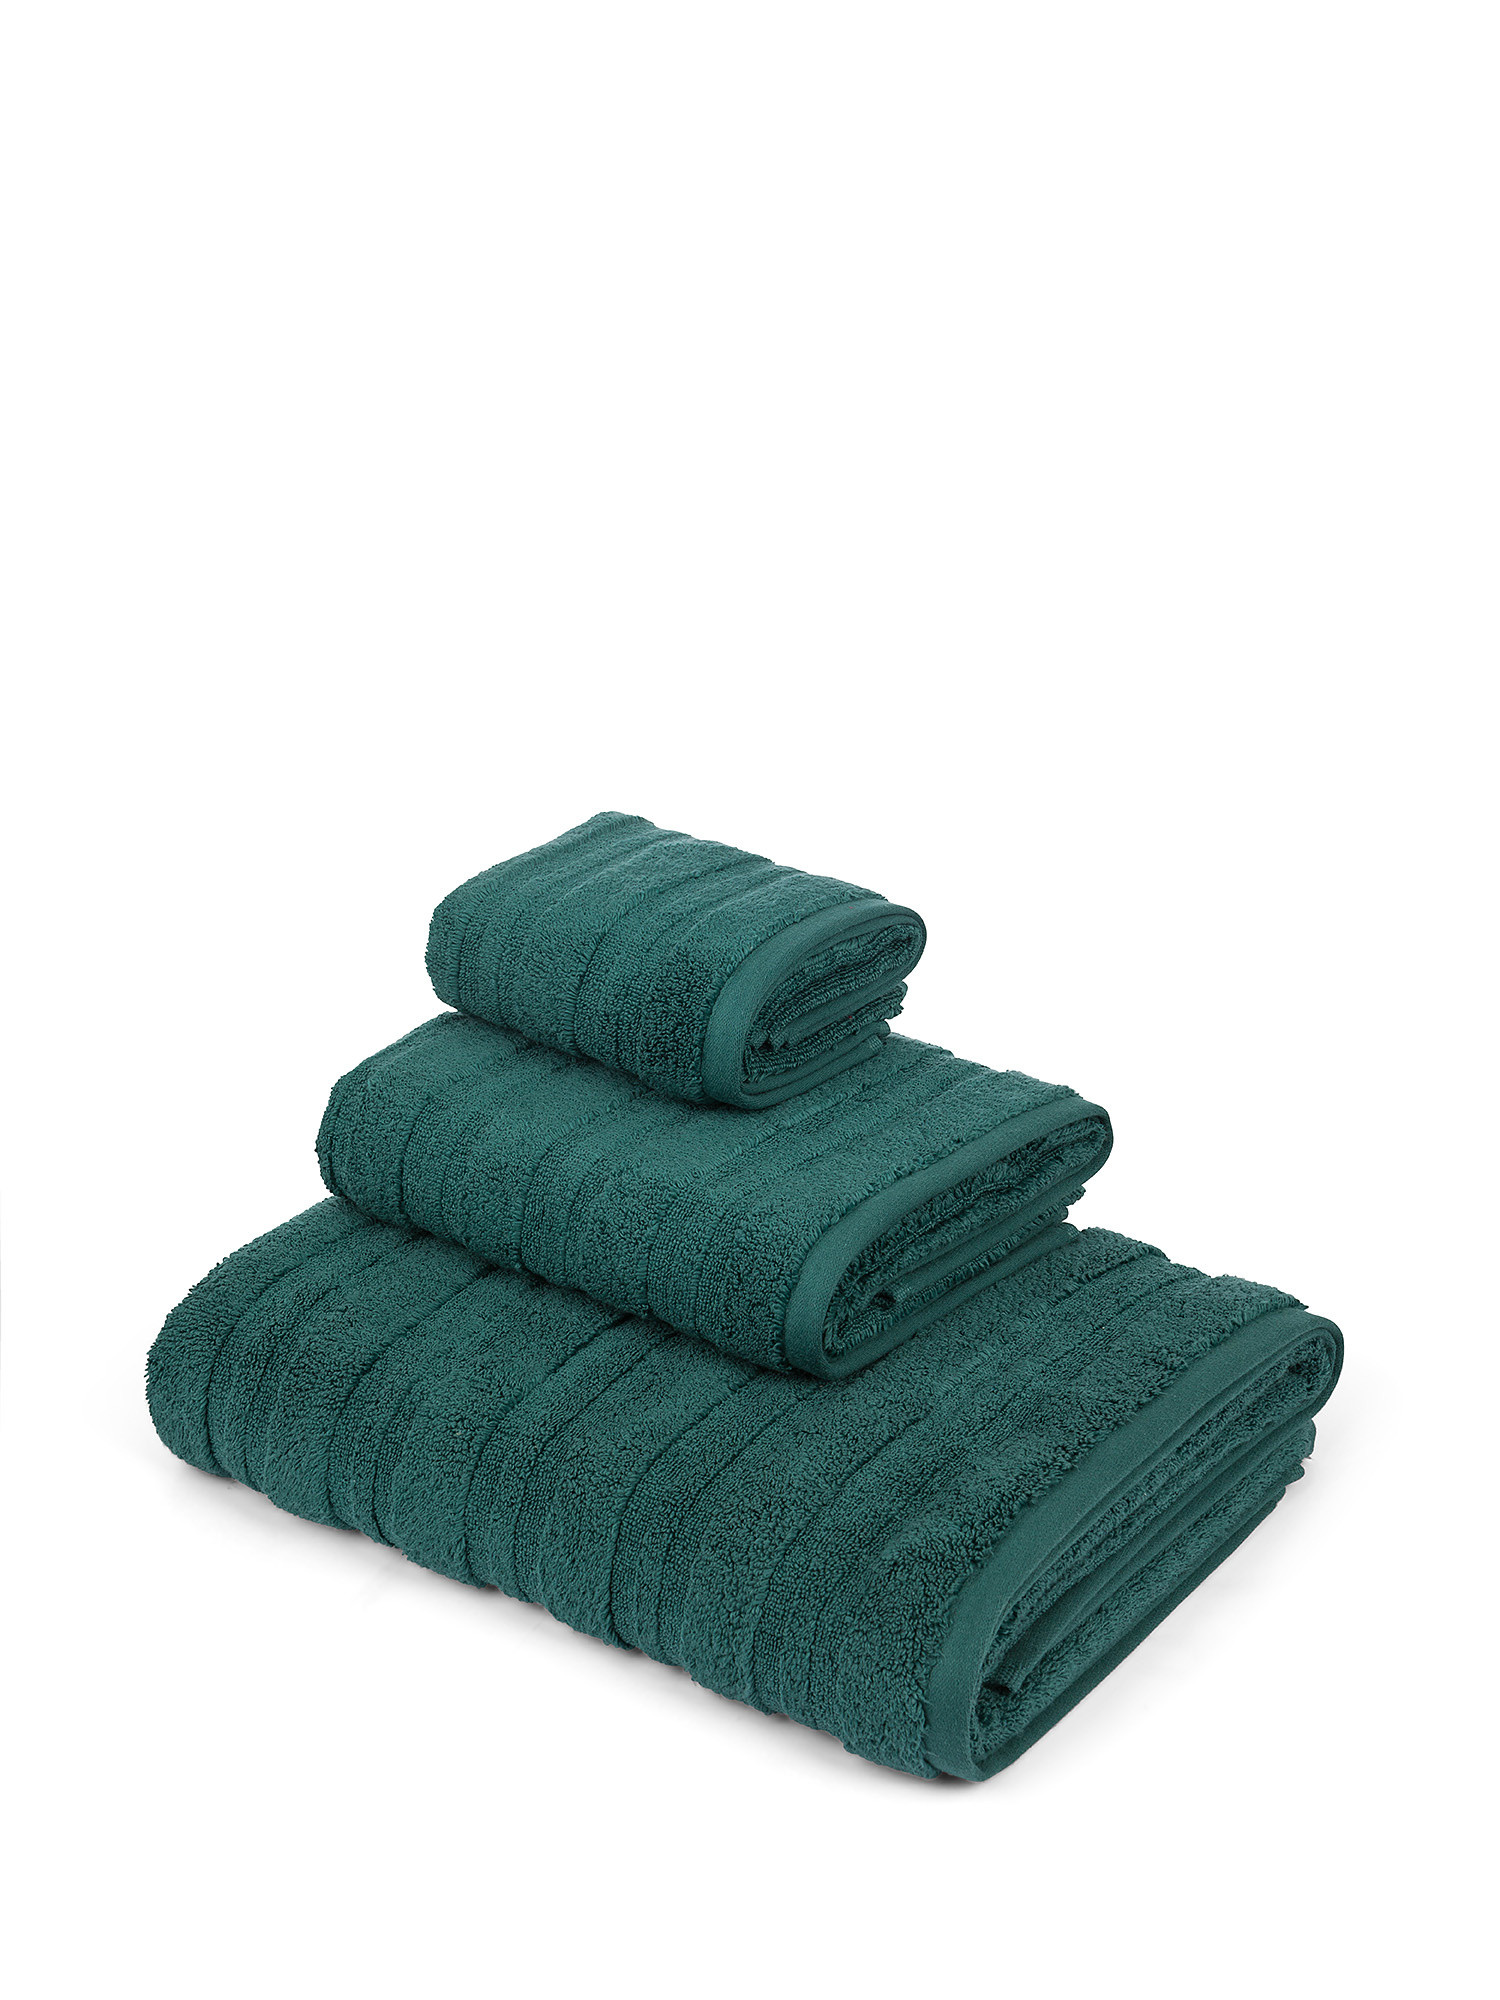 Zefiro Gold solid color 100% cotton towel, Dark Green, large image number 0